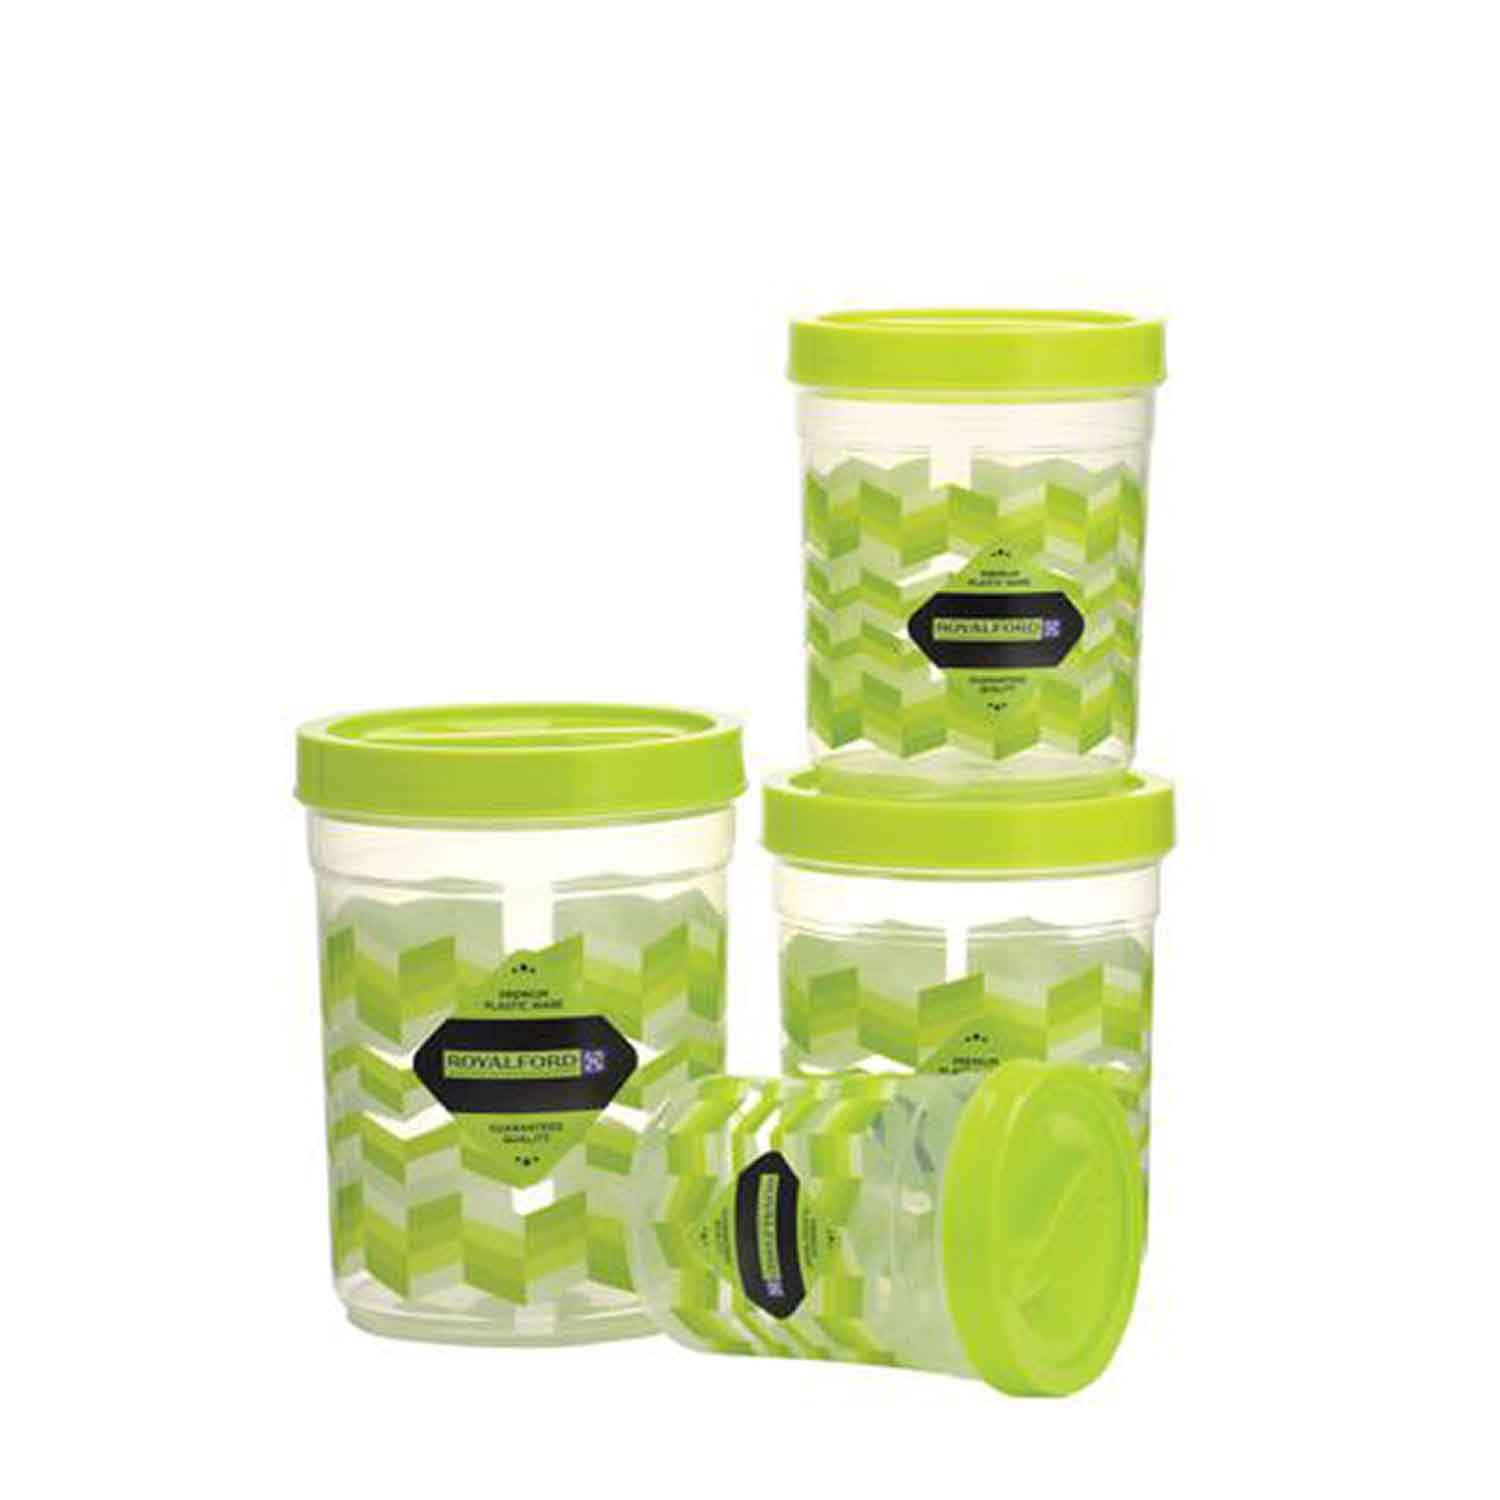 Royal Ford 4Pcs Plastic Container Set